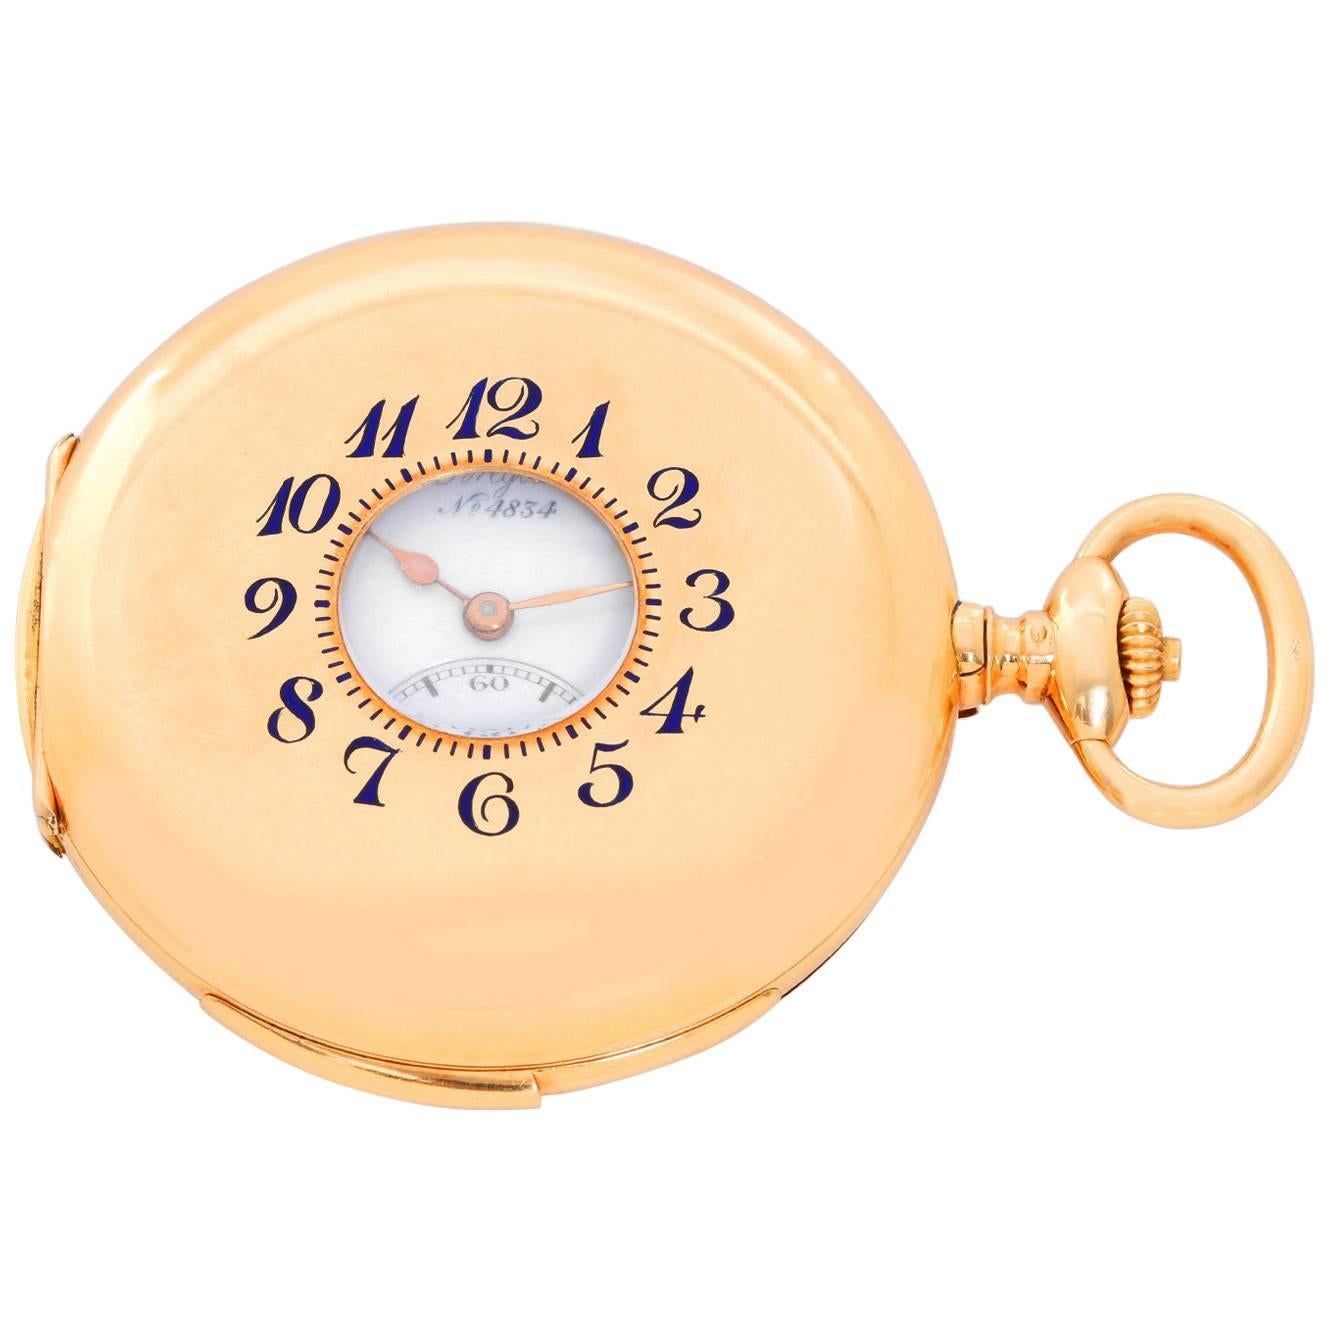 Breguet Yellow Gold Minute Repeater Pocket Watch